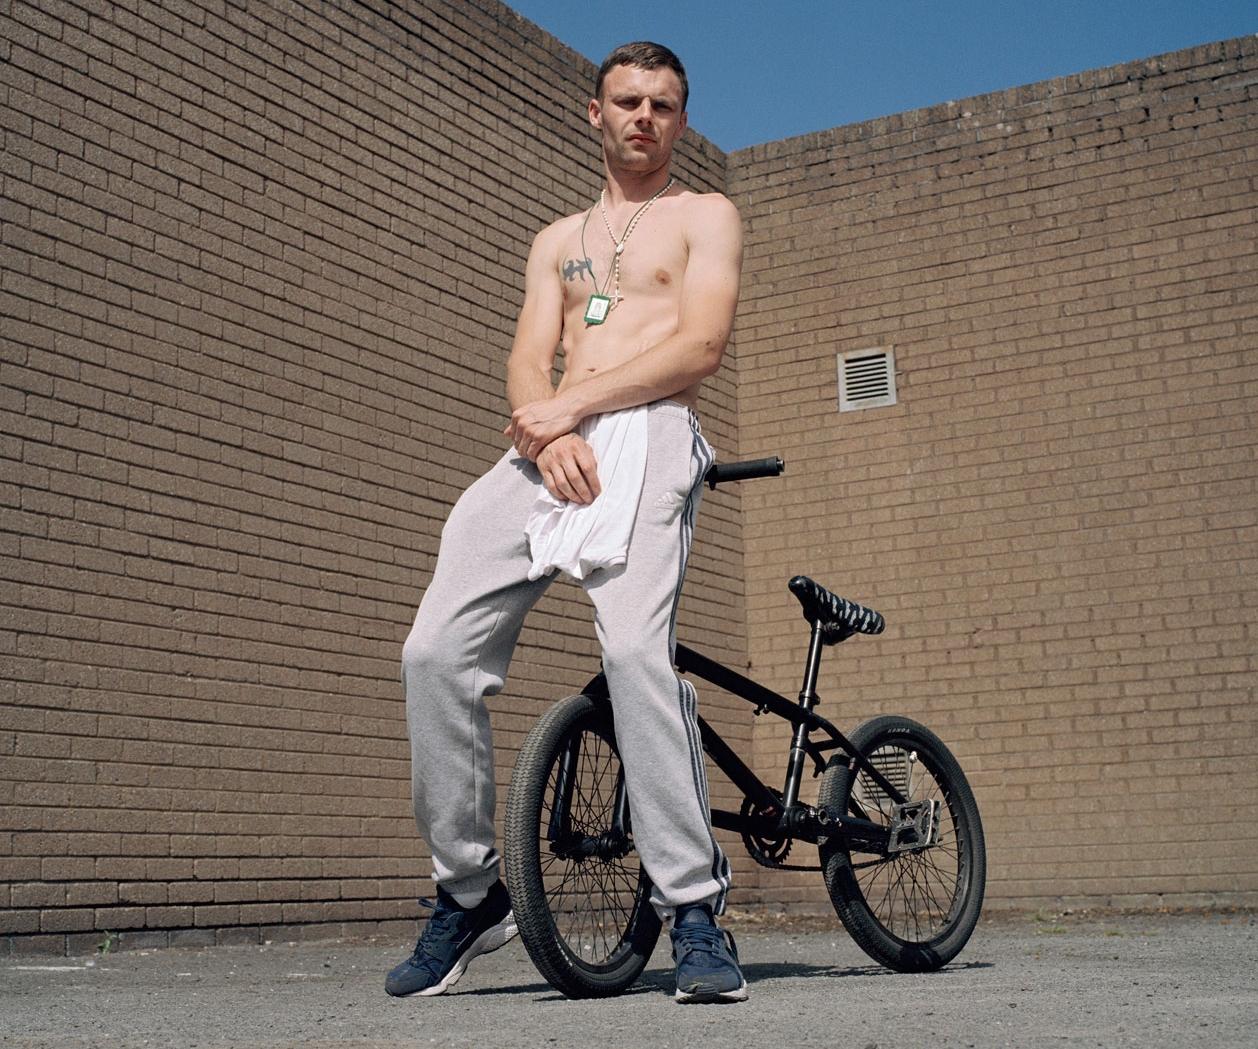 Stephen. <br> Too Hot for Tops<br>is a study of men who <br> venture onto Dublin’s streets <br> unselfconsciously bare-chested <br> on a summer’s day. <br> 1 of 20 